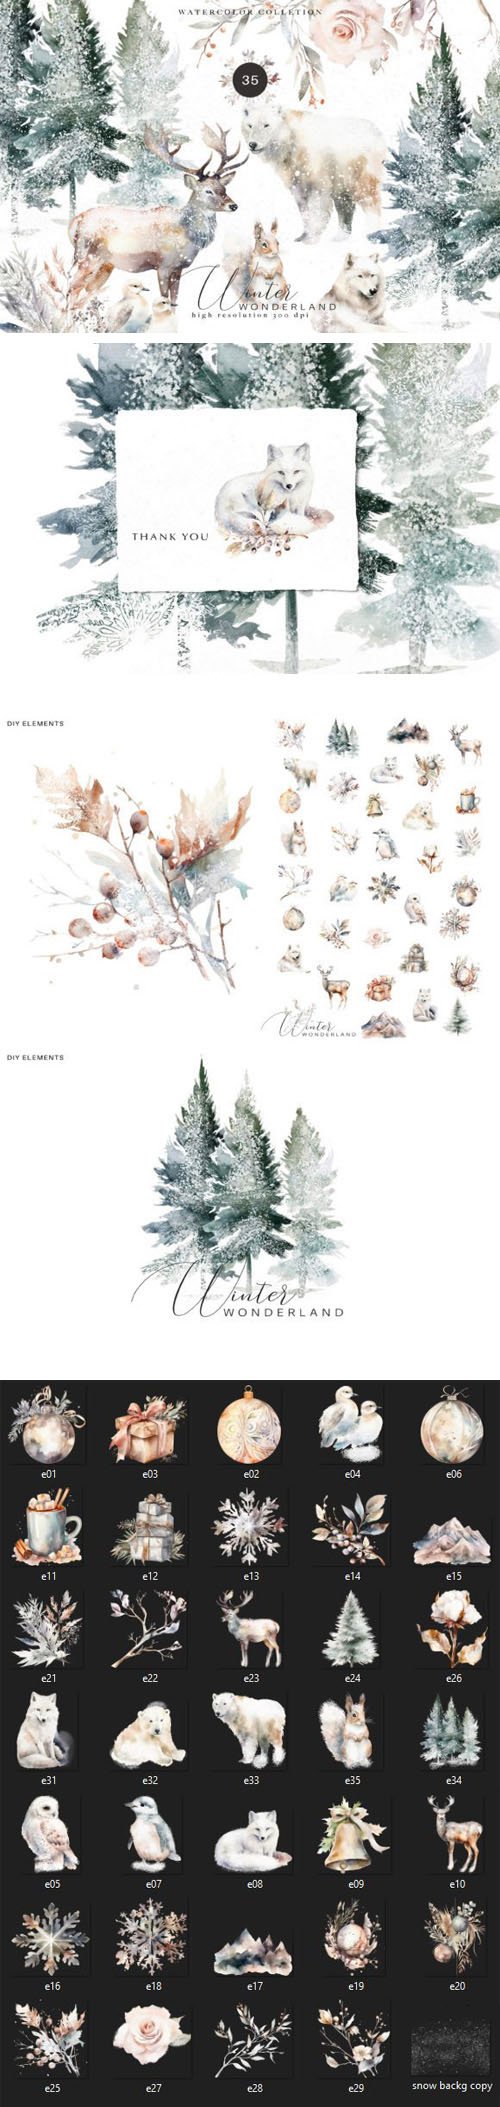 Evergreen - Winter Wonderland - Watercolor Clipart Collection